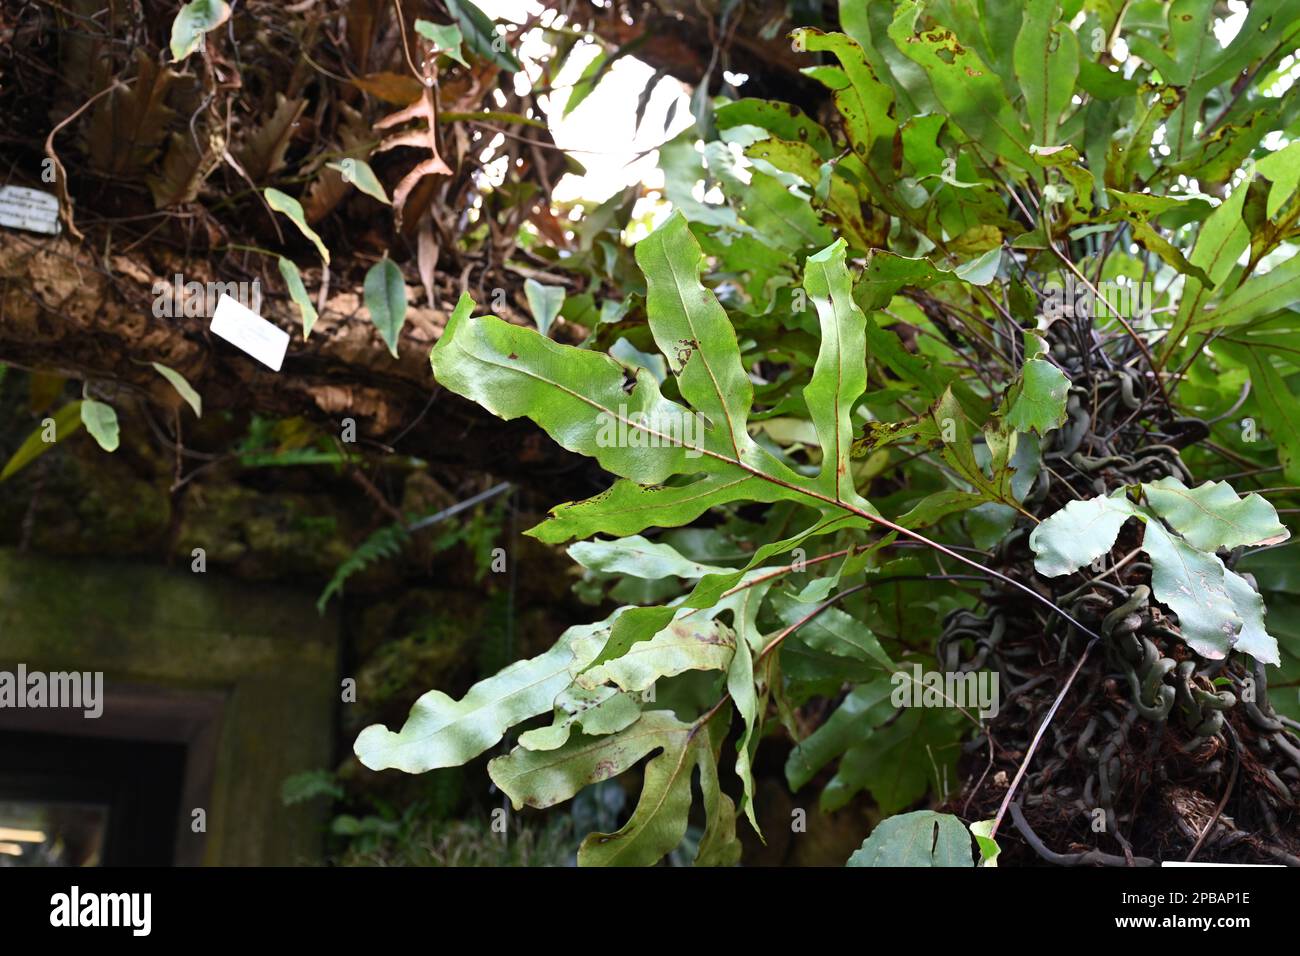 Fern in Latin called Microsorum variant captured in a greenhouse of a botanic garden among other exotic plants. It grows from rhizomes. Stock Photo